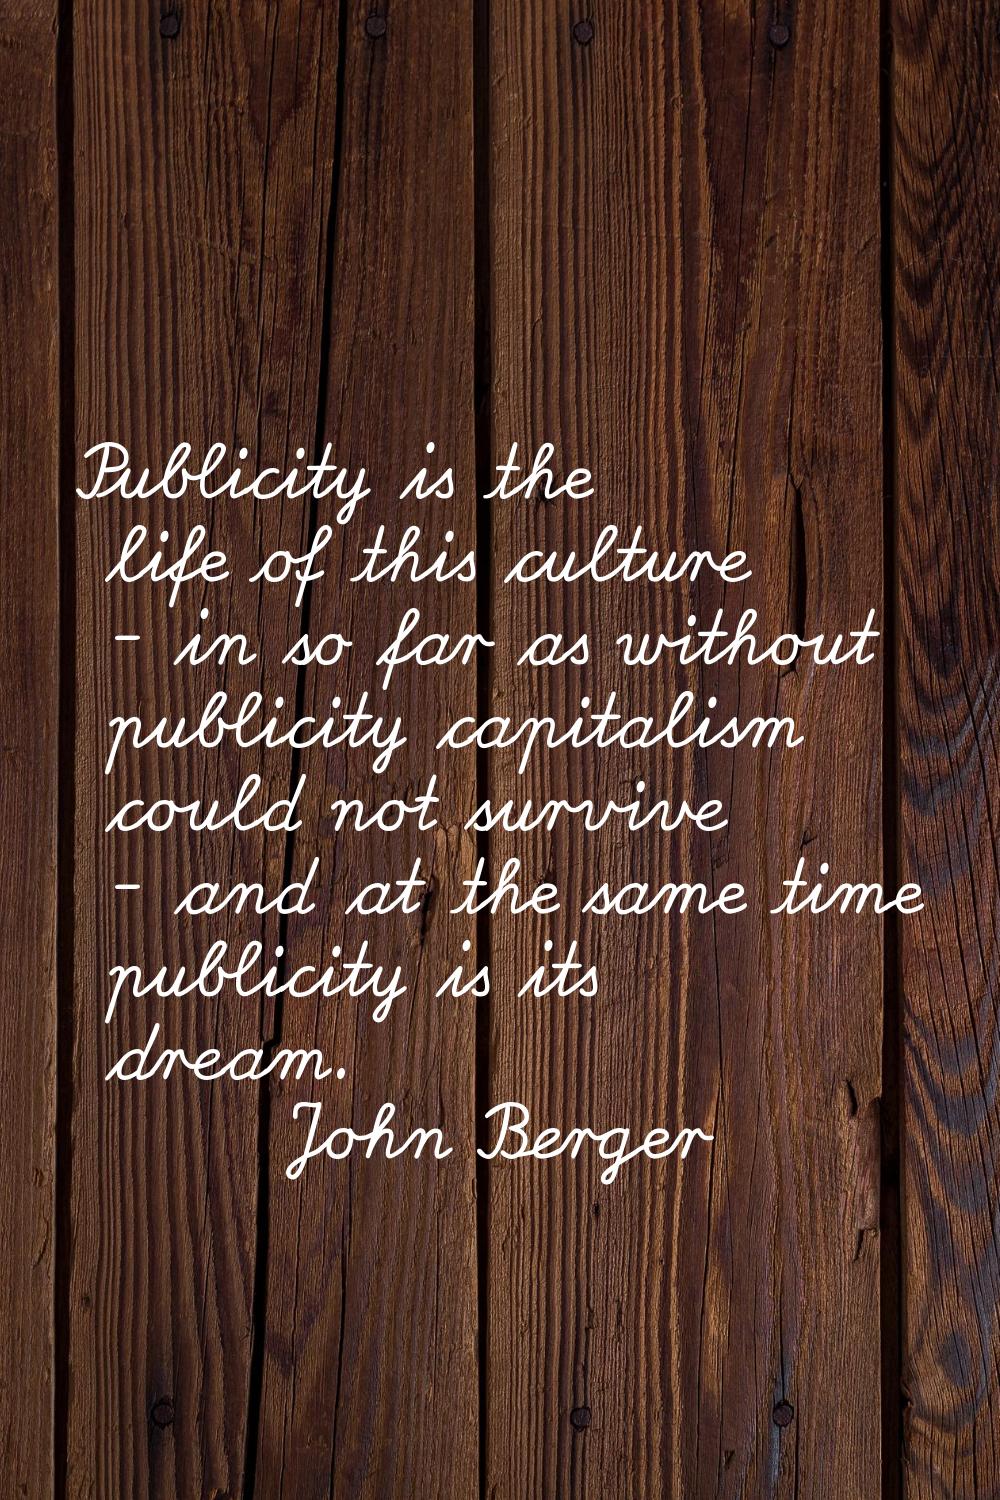 Publicity is the life of this culture - in so far as without publicity capitalism could not survive